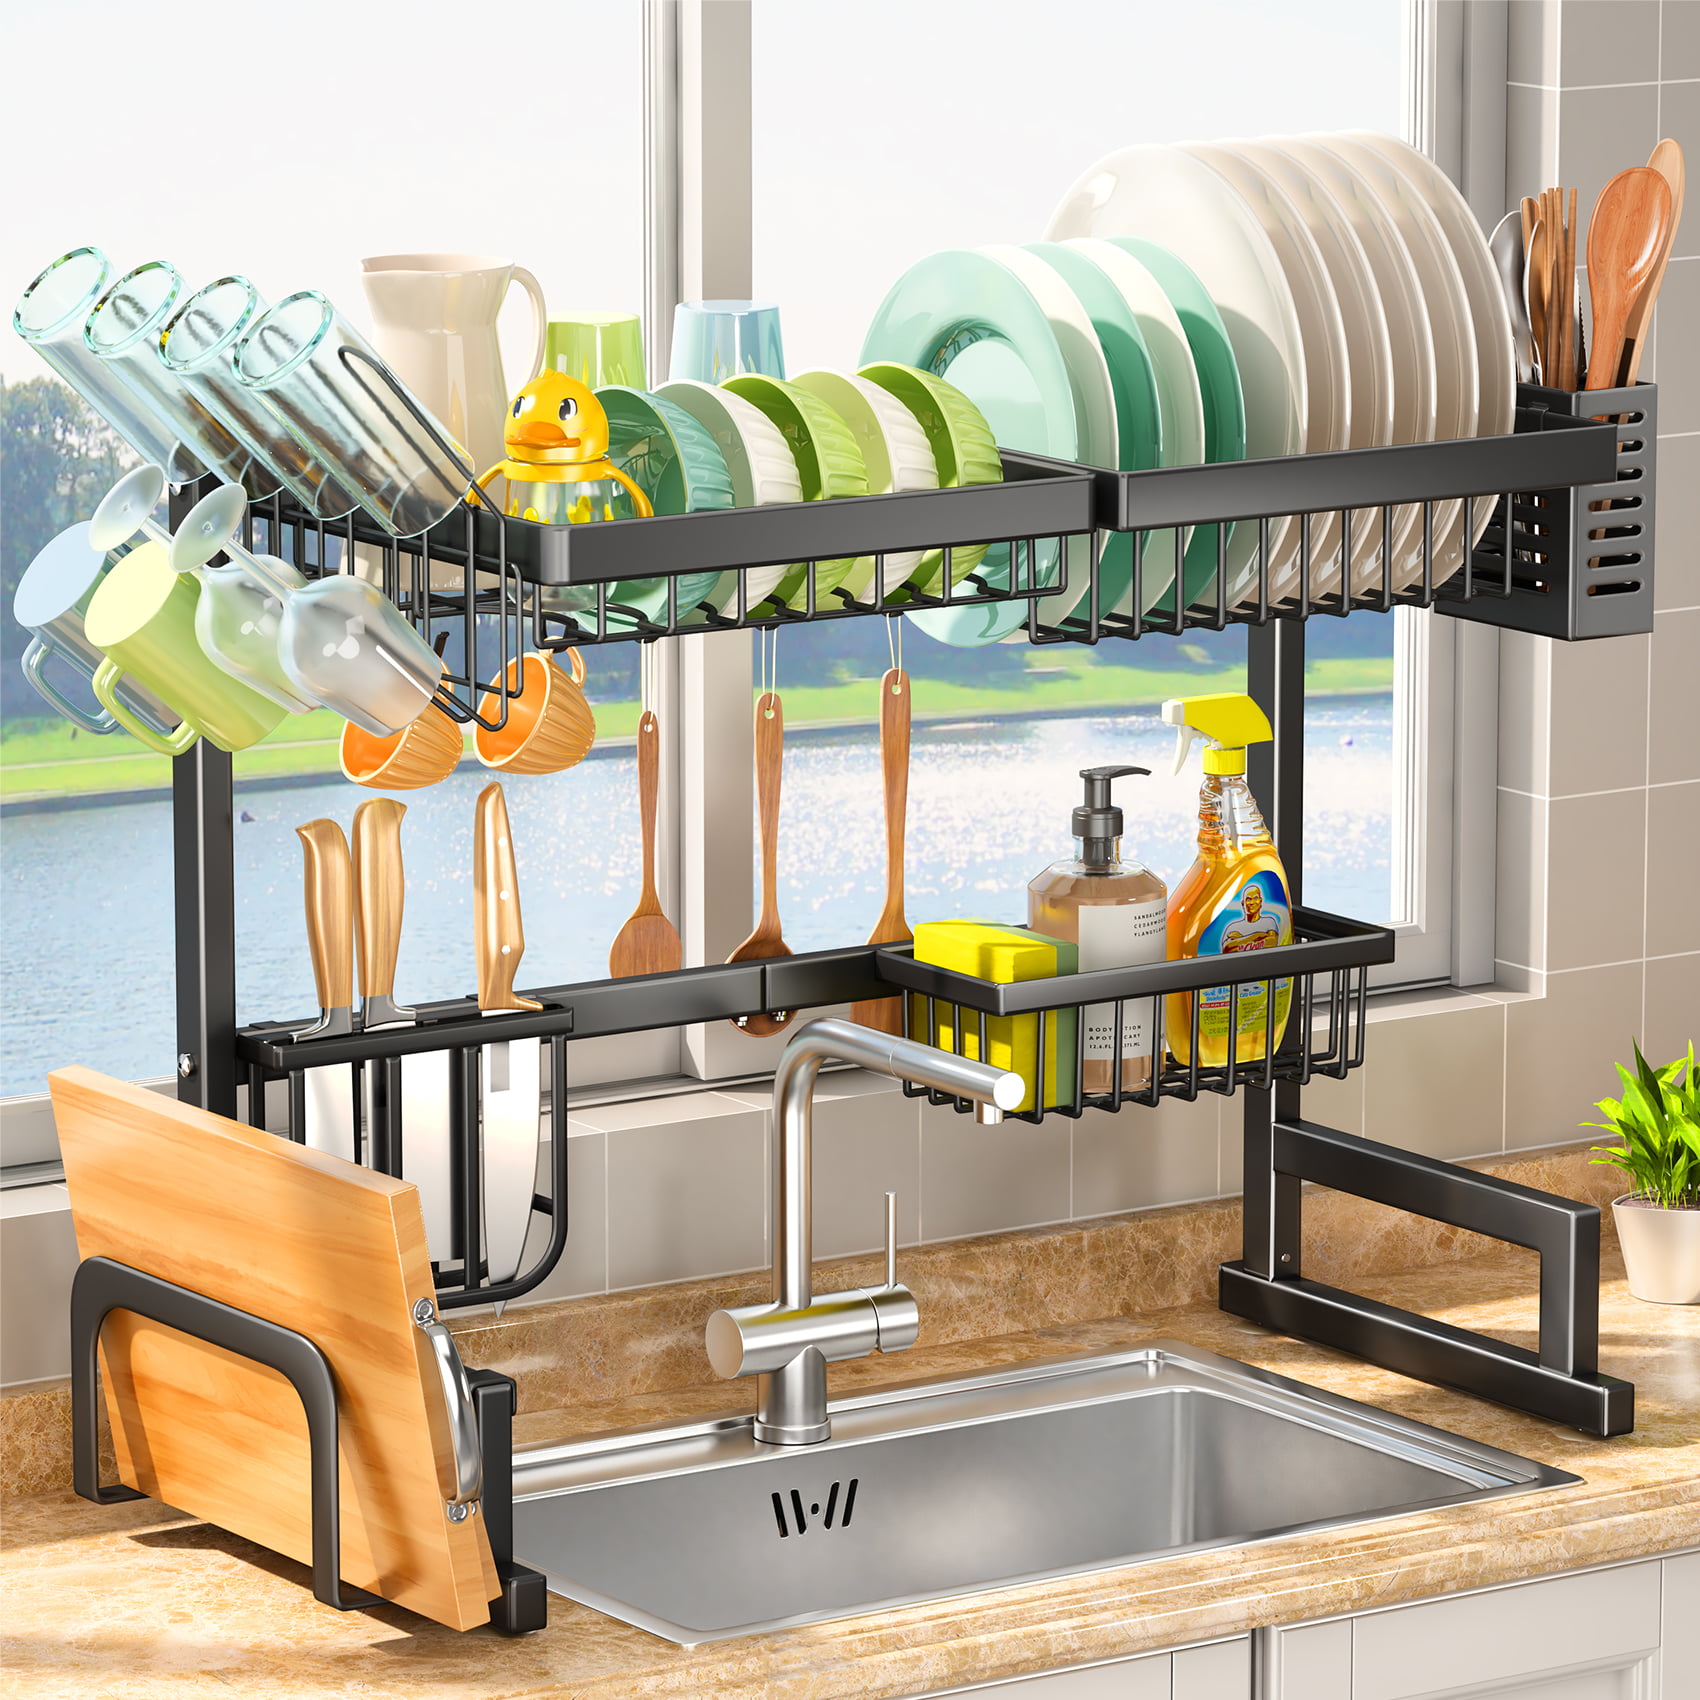 PUSDON Over Sink Dish Drying Rack Display (26-38), Adjustable Large 2  Tier Dish Drainer for Storage Kitchen Counter Organization, Stainless Steel